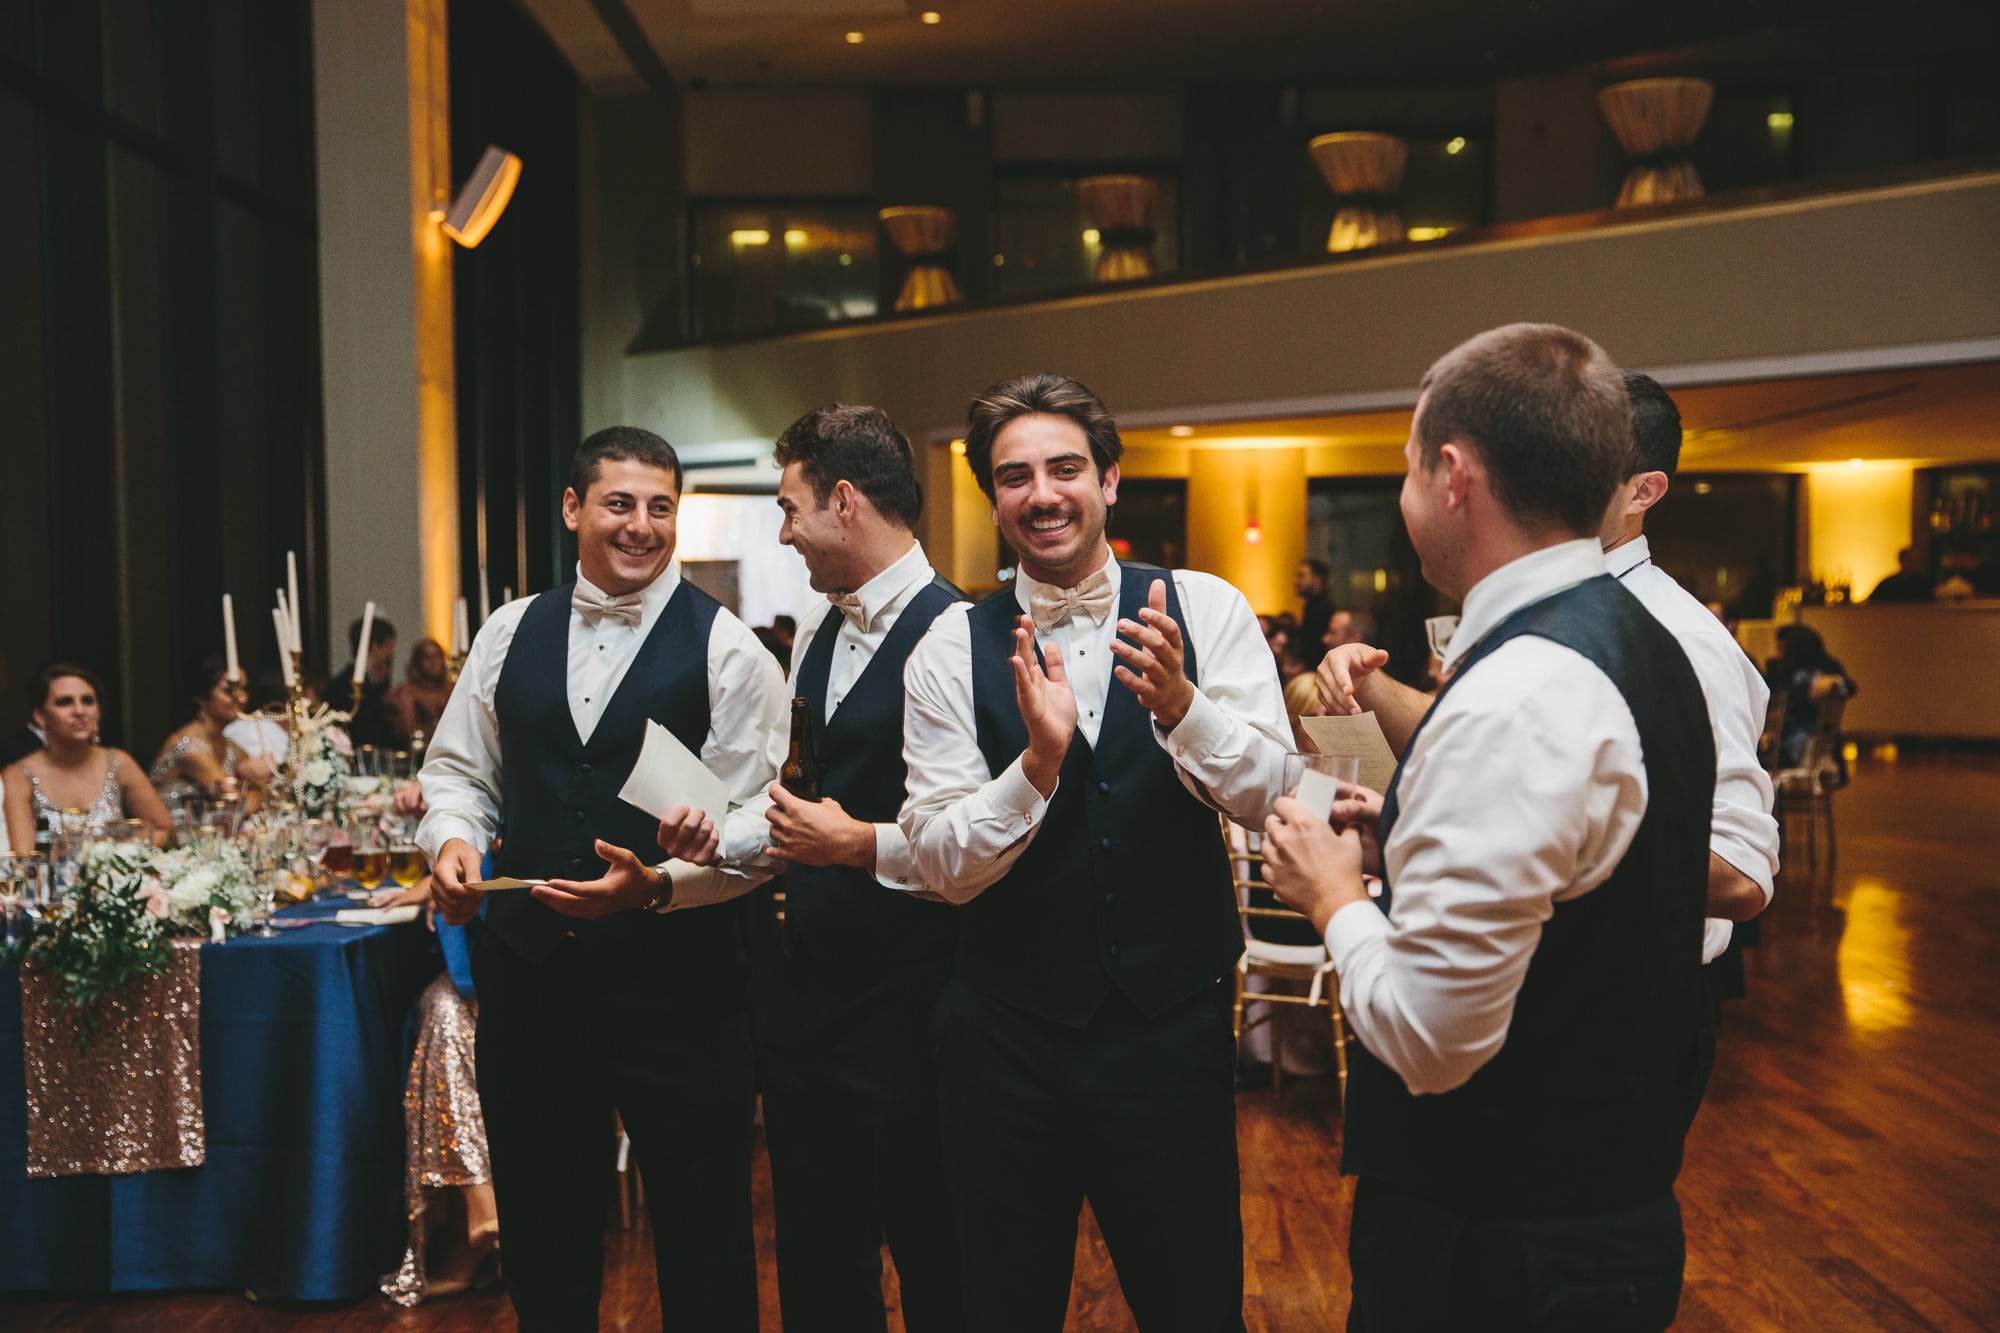 A documentary photograph of groomsmen clapping during their wedding speech at a State Room Wedding in Boston, Massachusetts